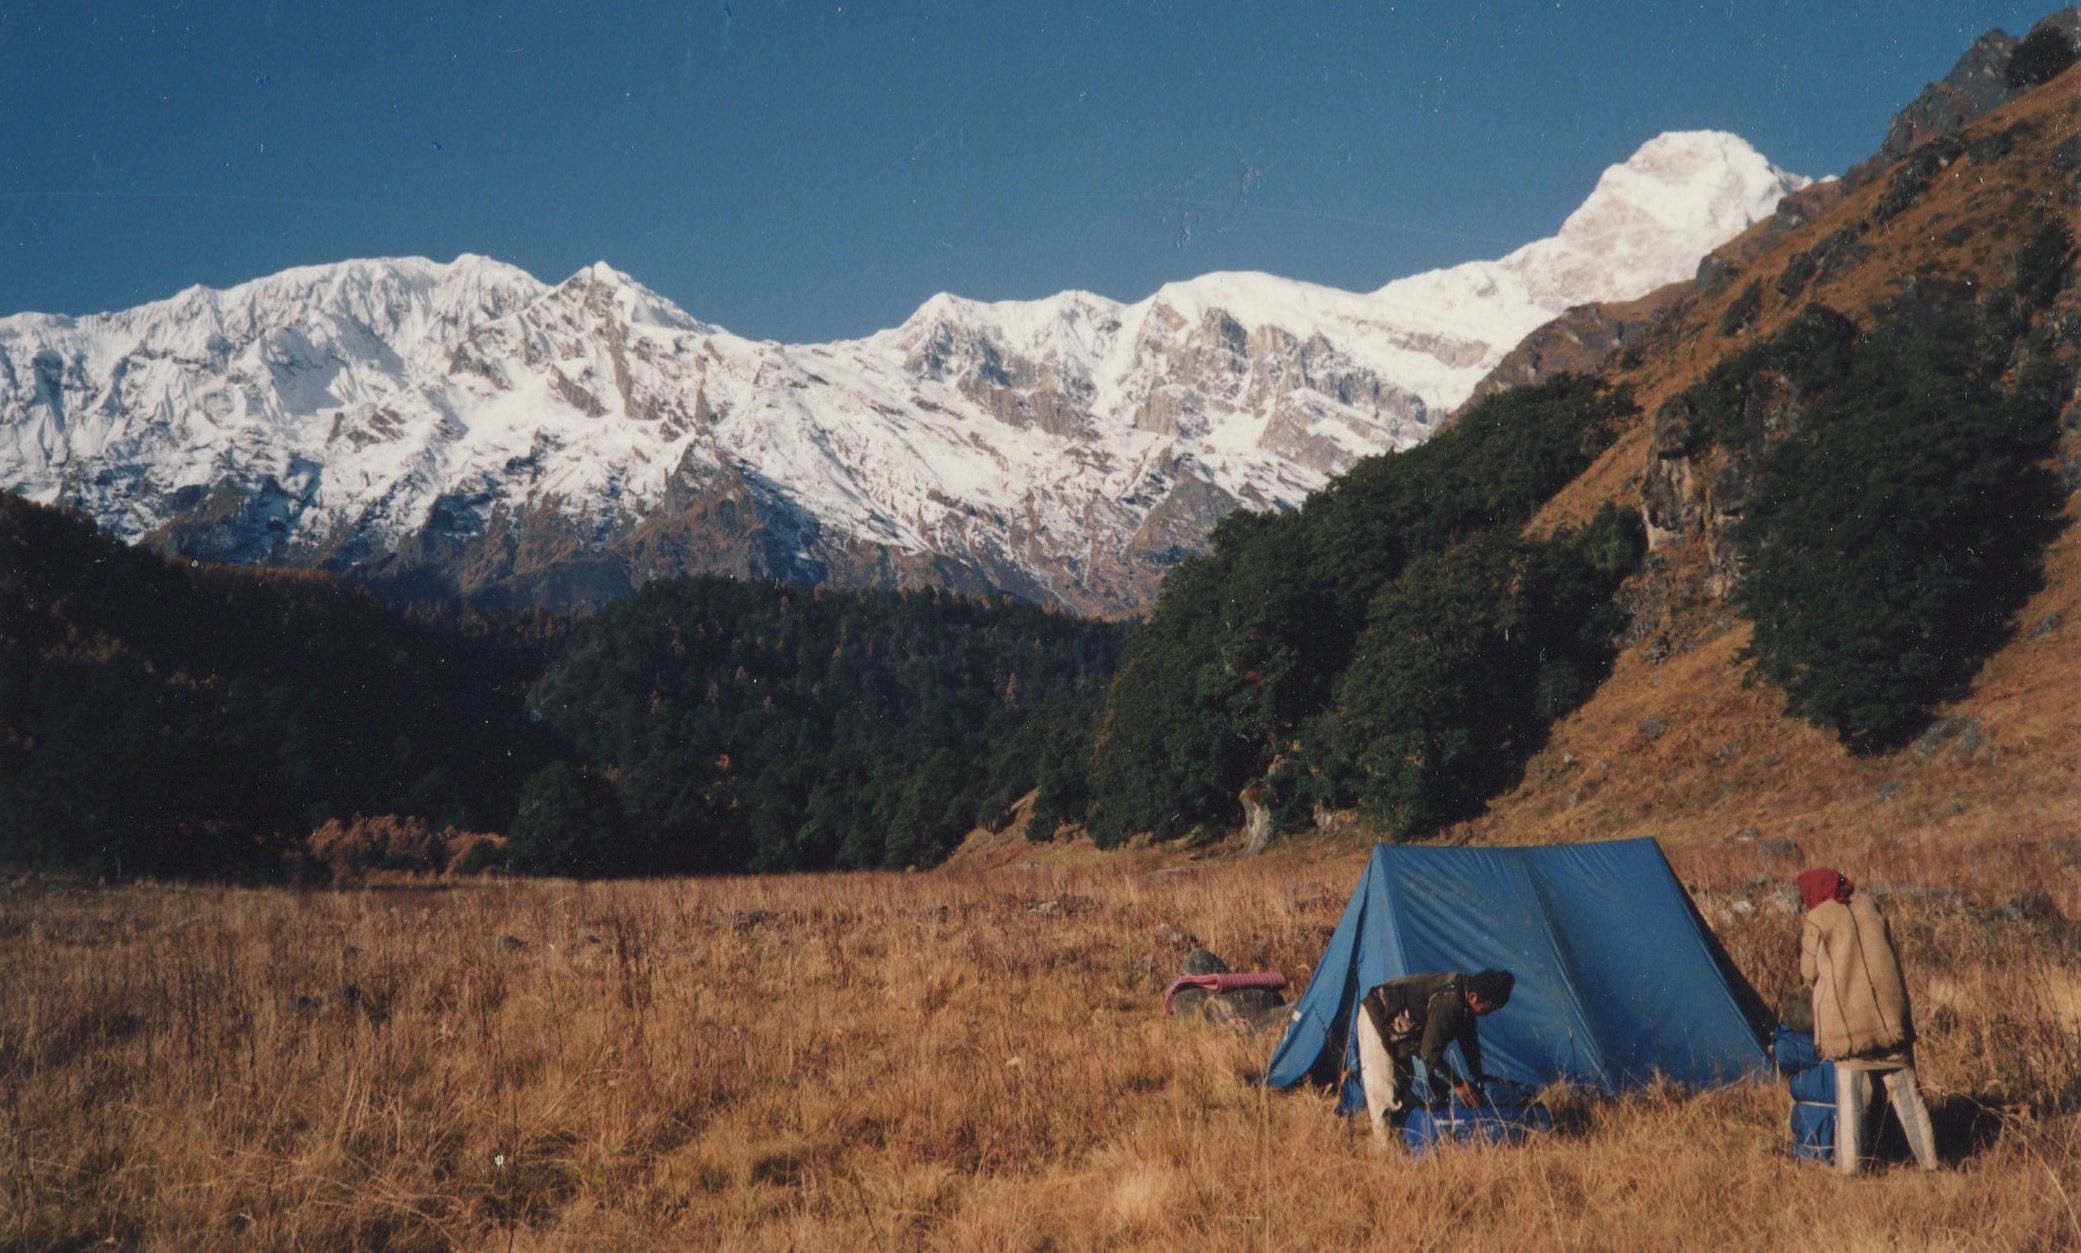 Himalchuli from Camp in Chuling Valley